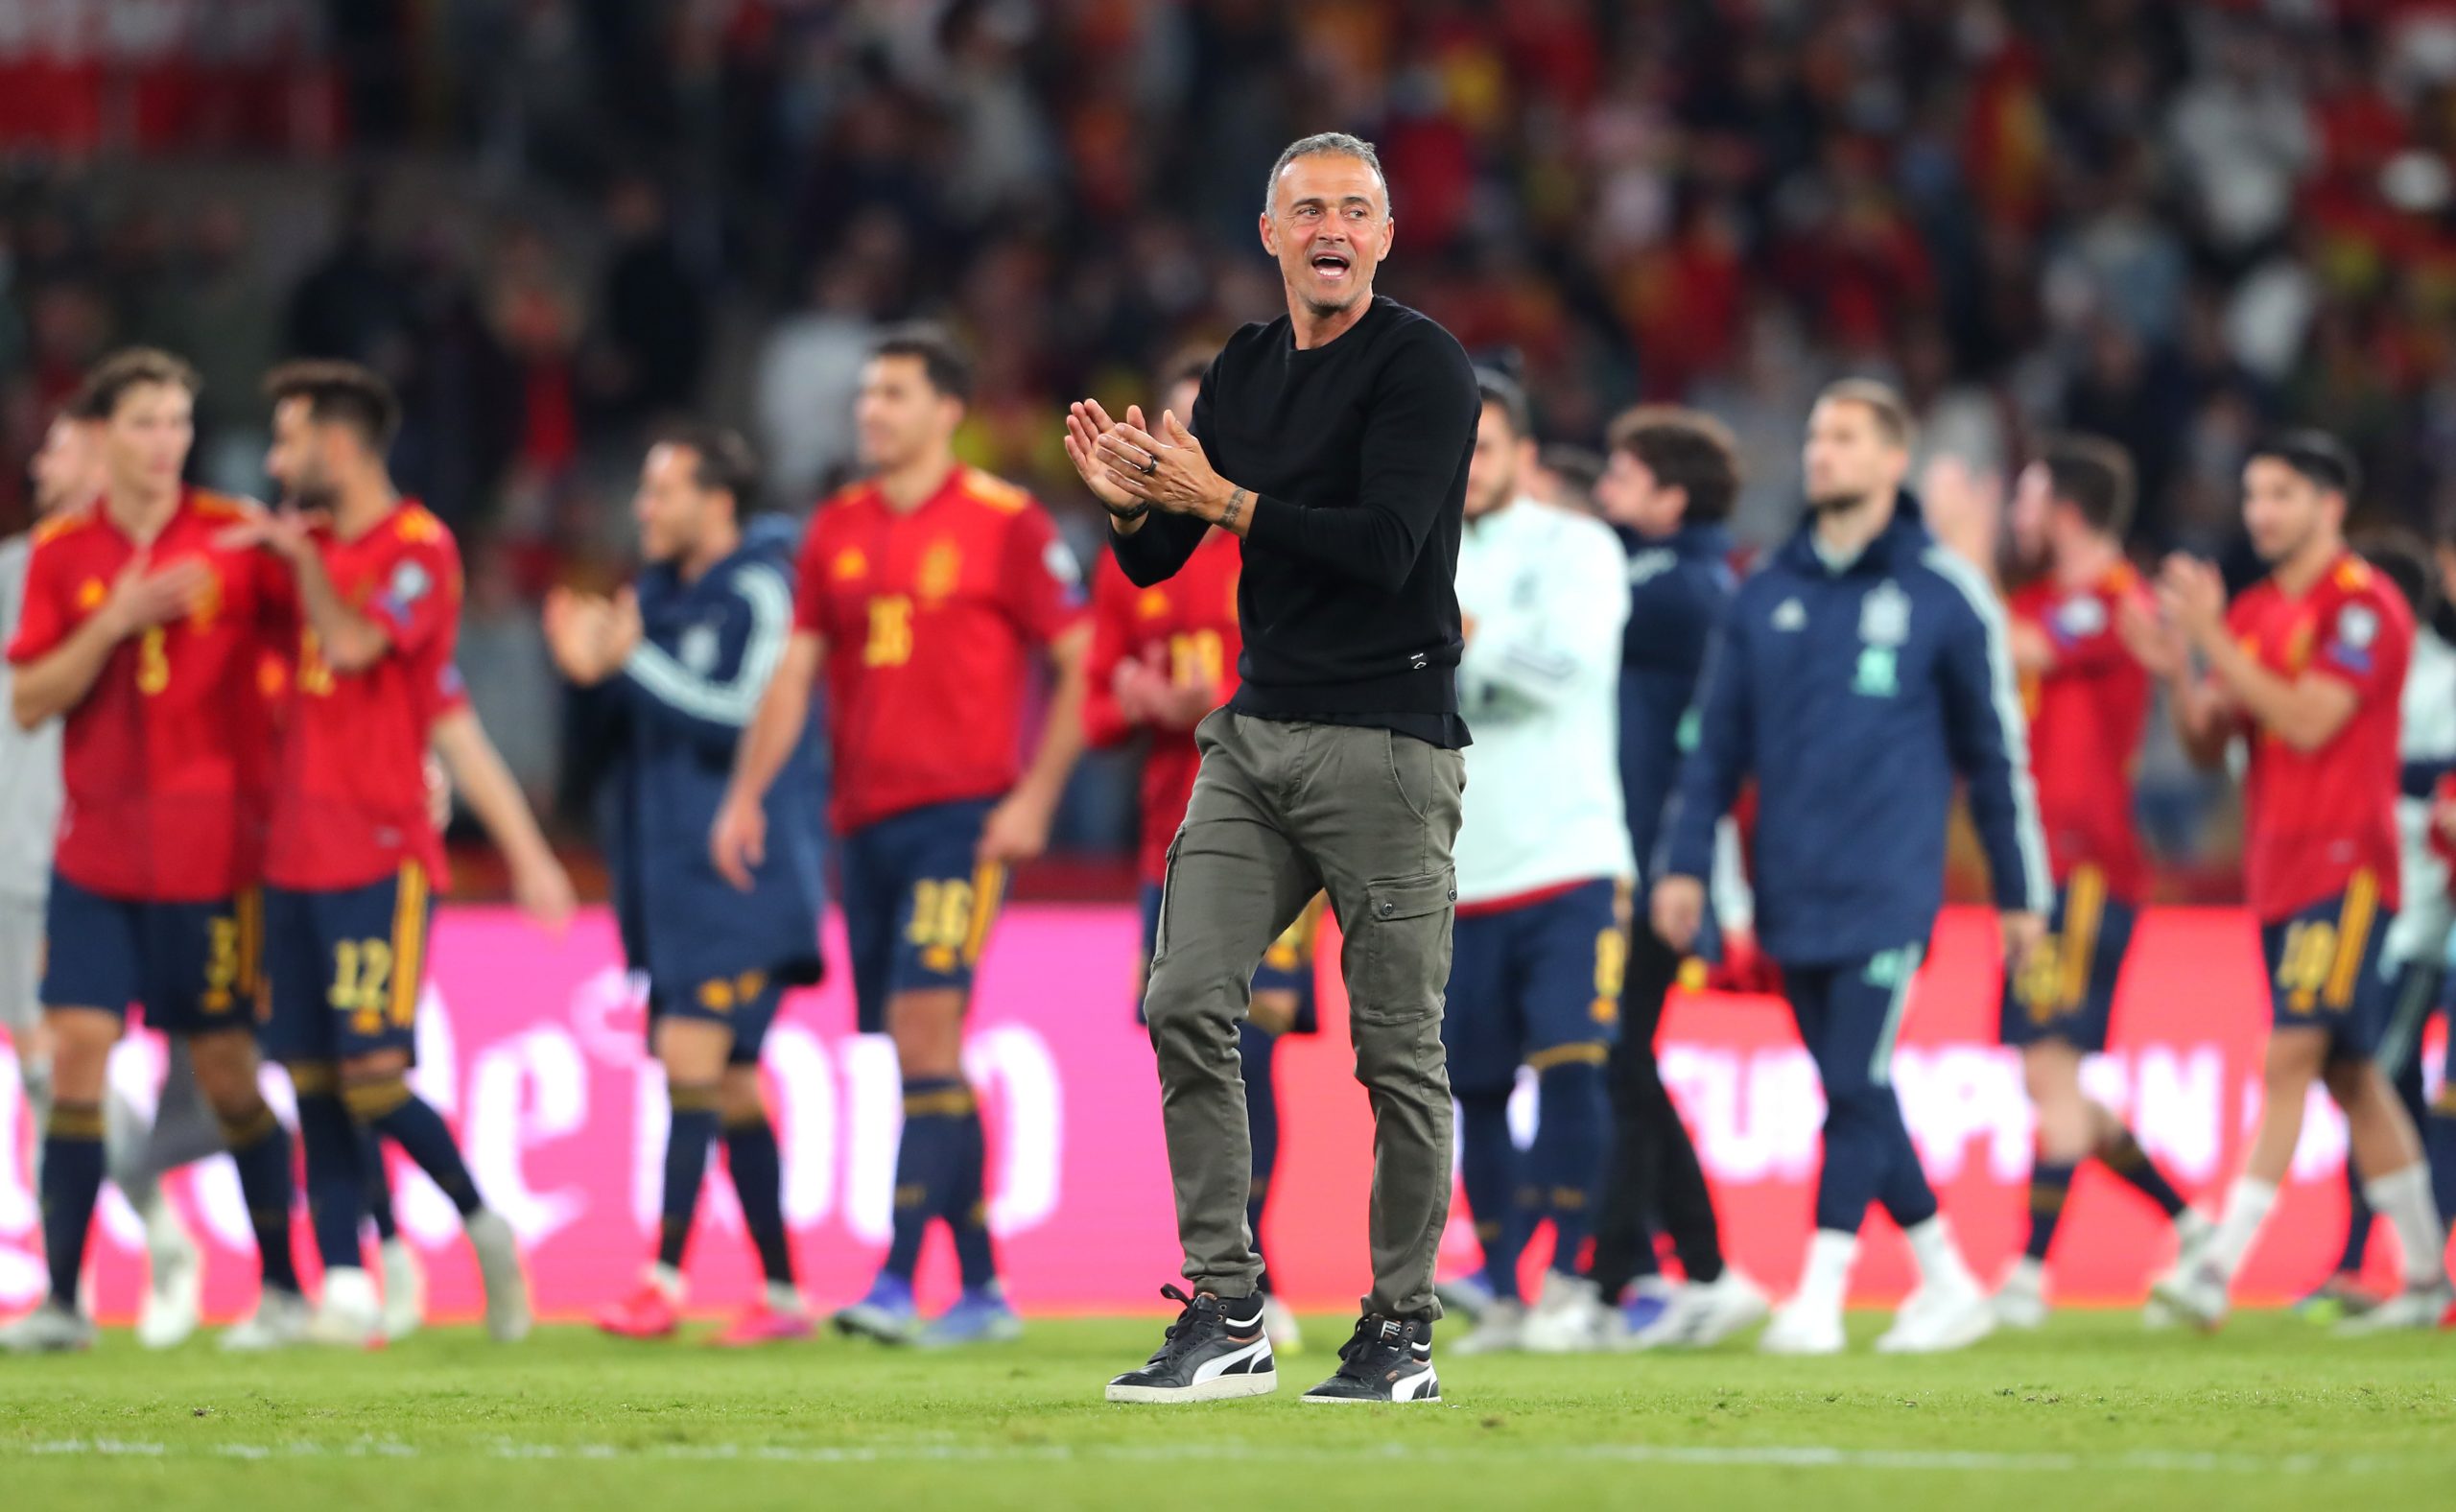 Luis Enrique is being considered by Manchester United as a potential replacement to Ole Gunnar Solskjaer.